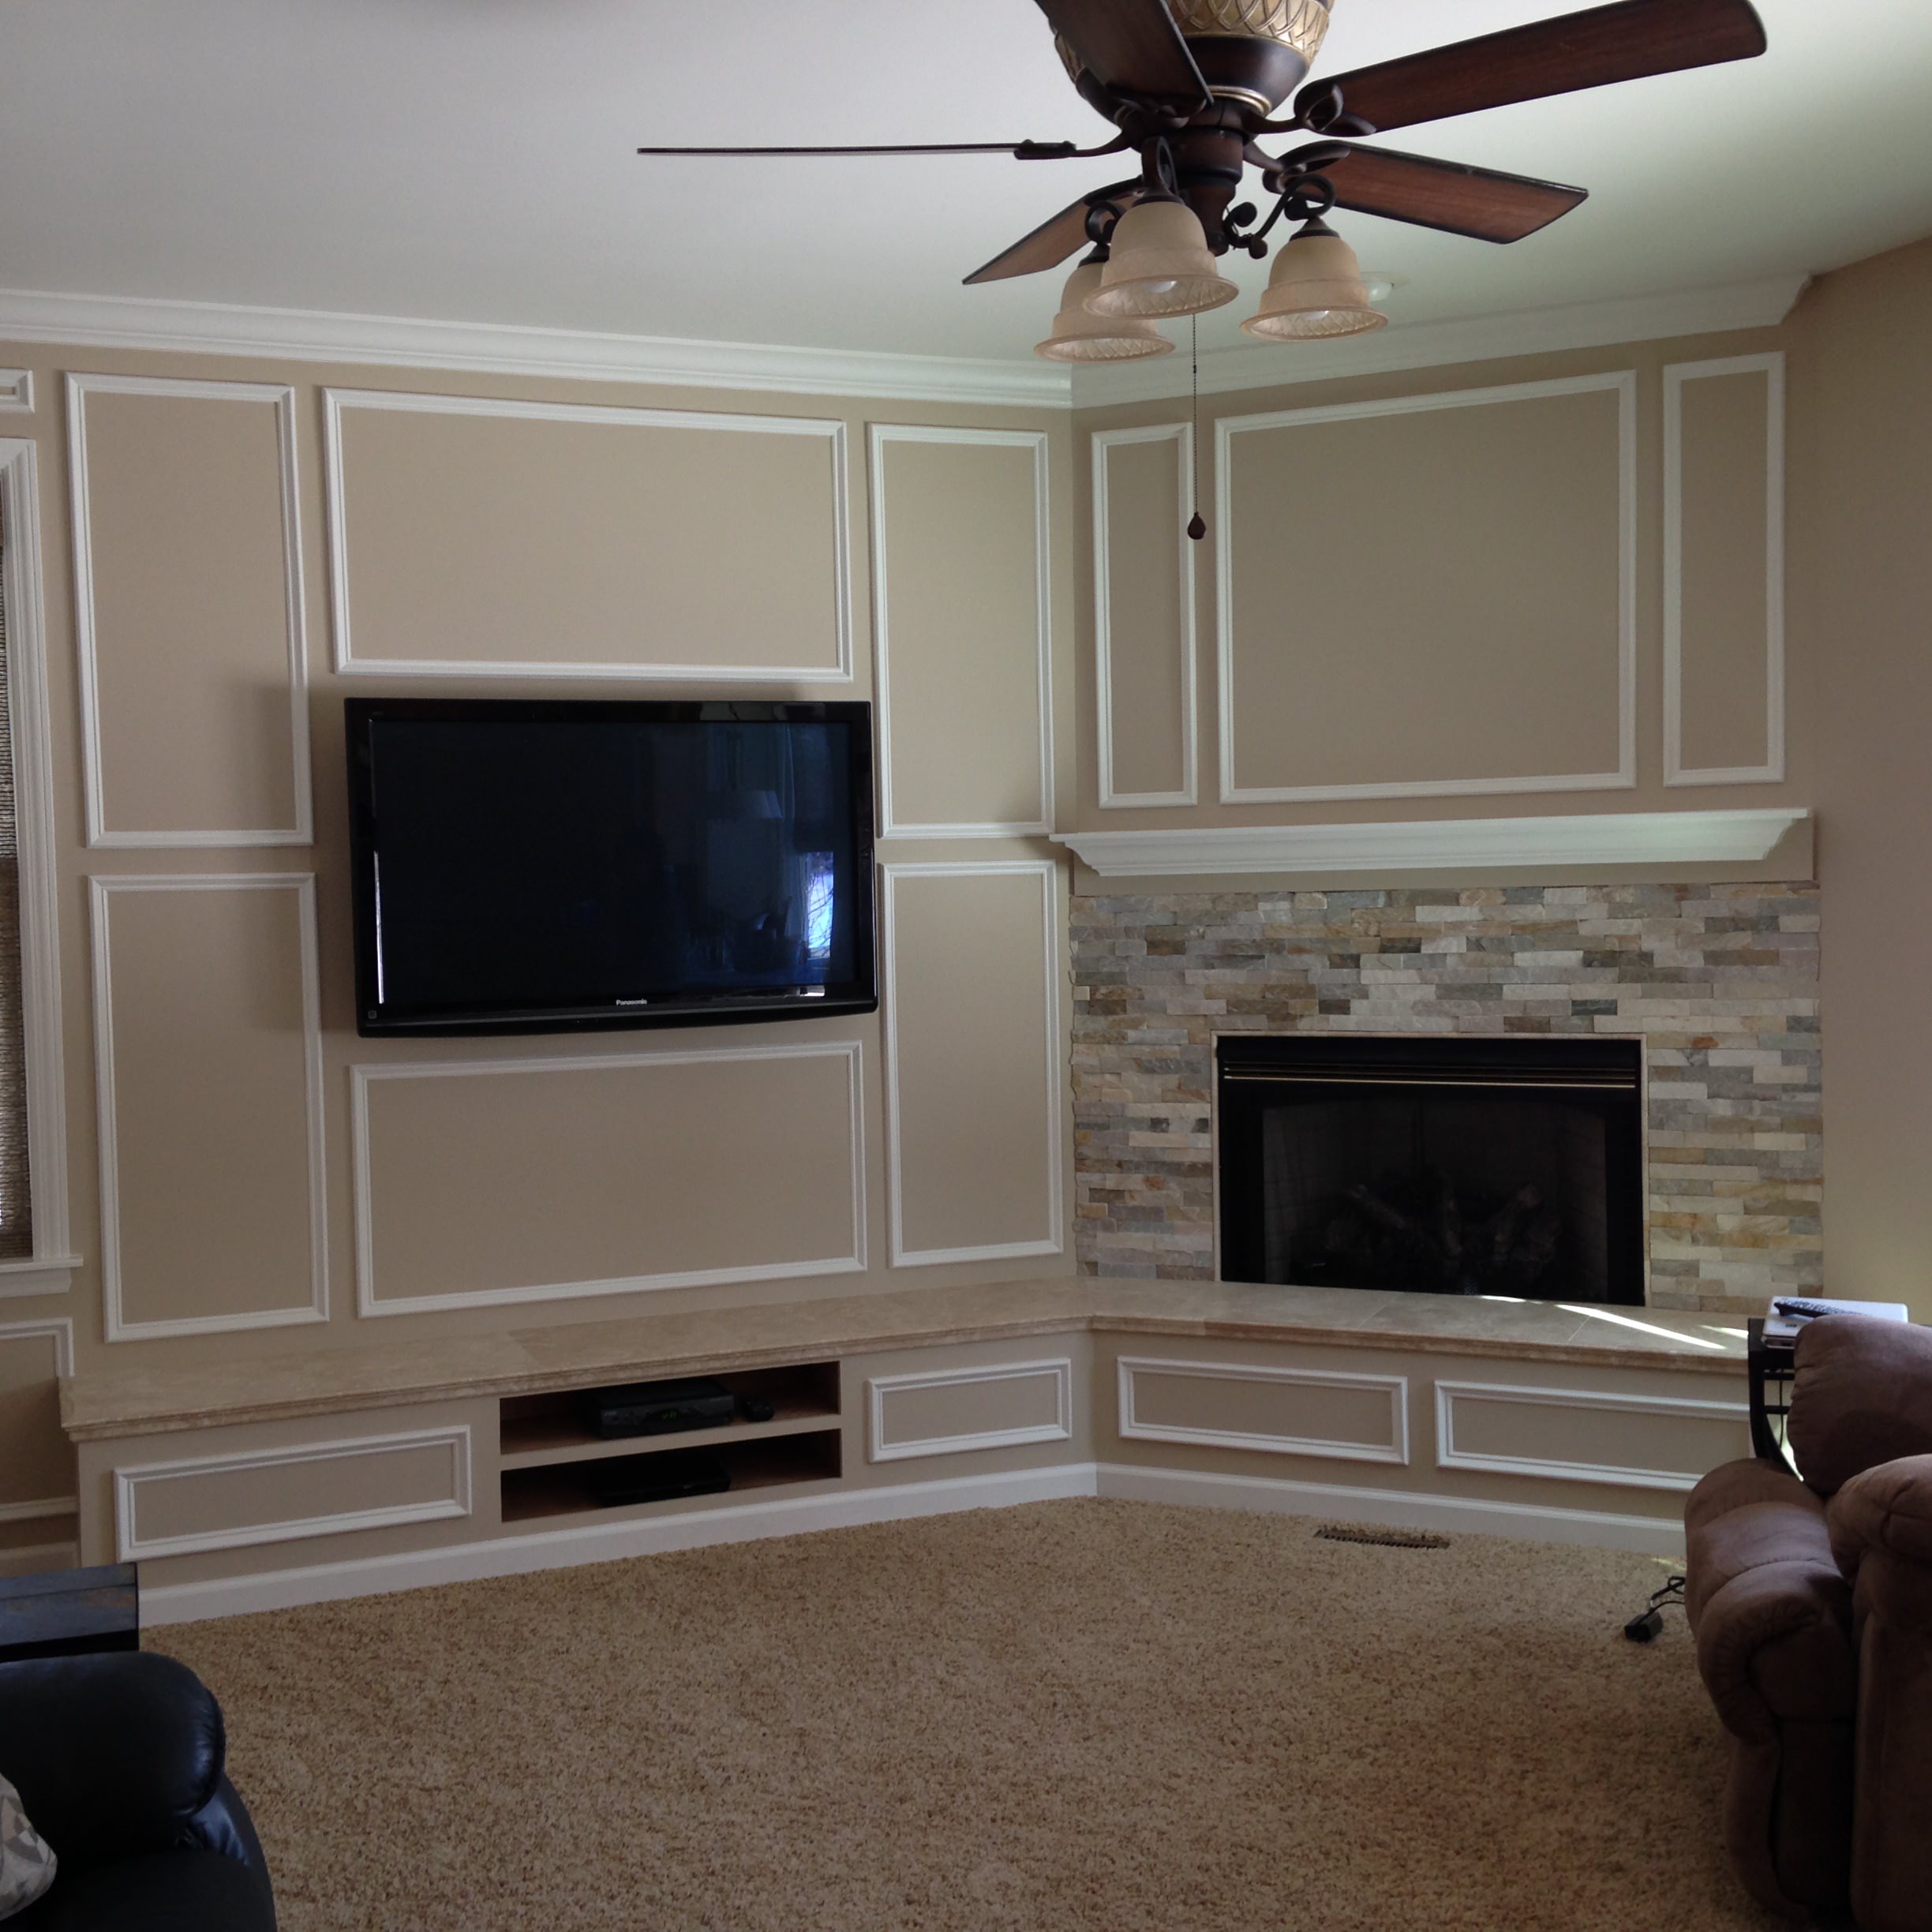 Before and After Media Wall/Fireplace